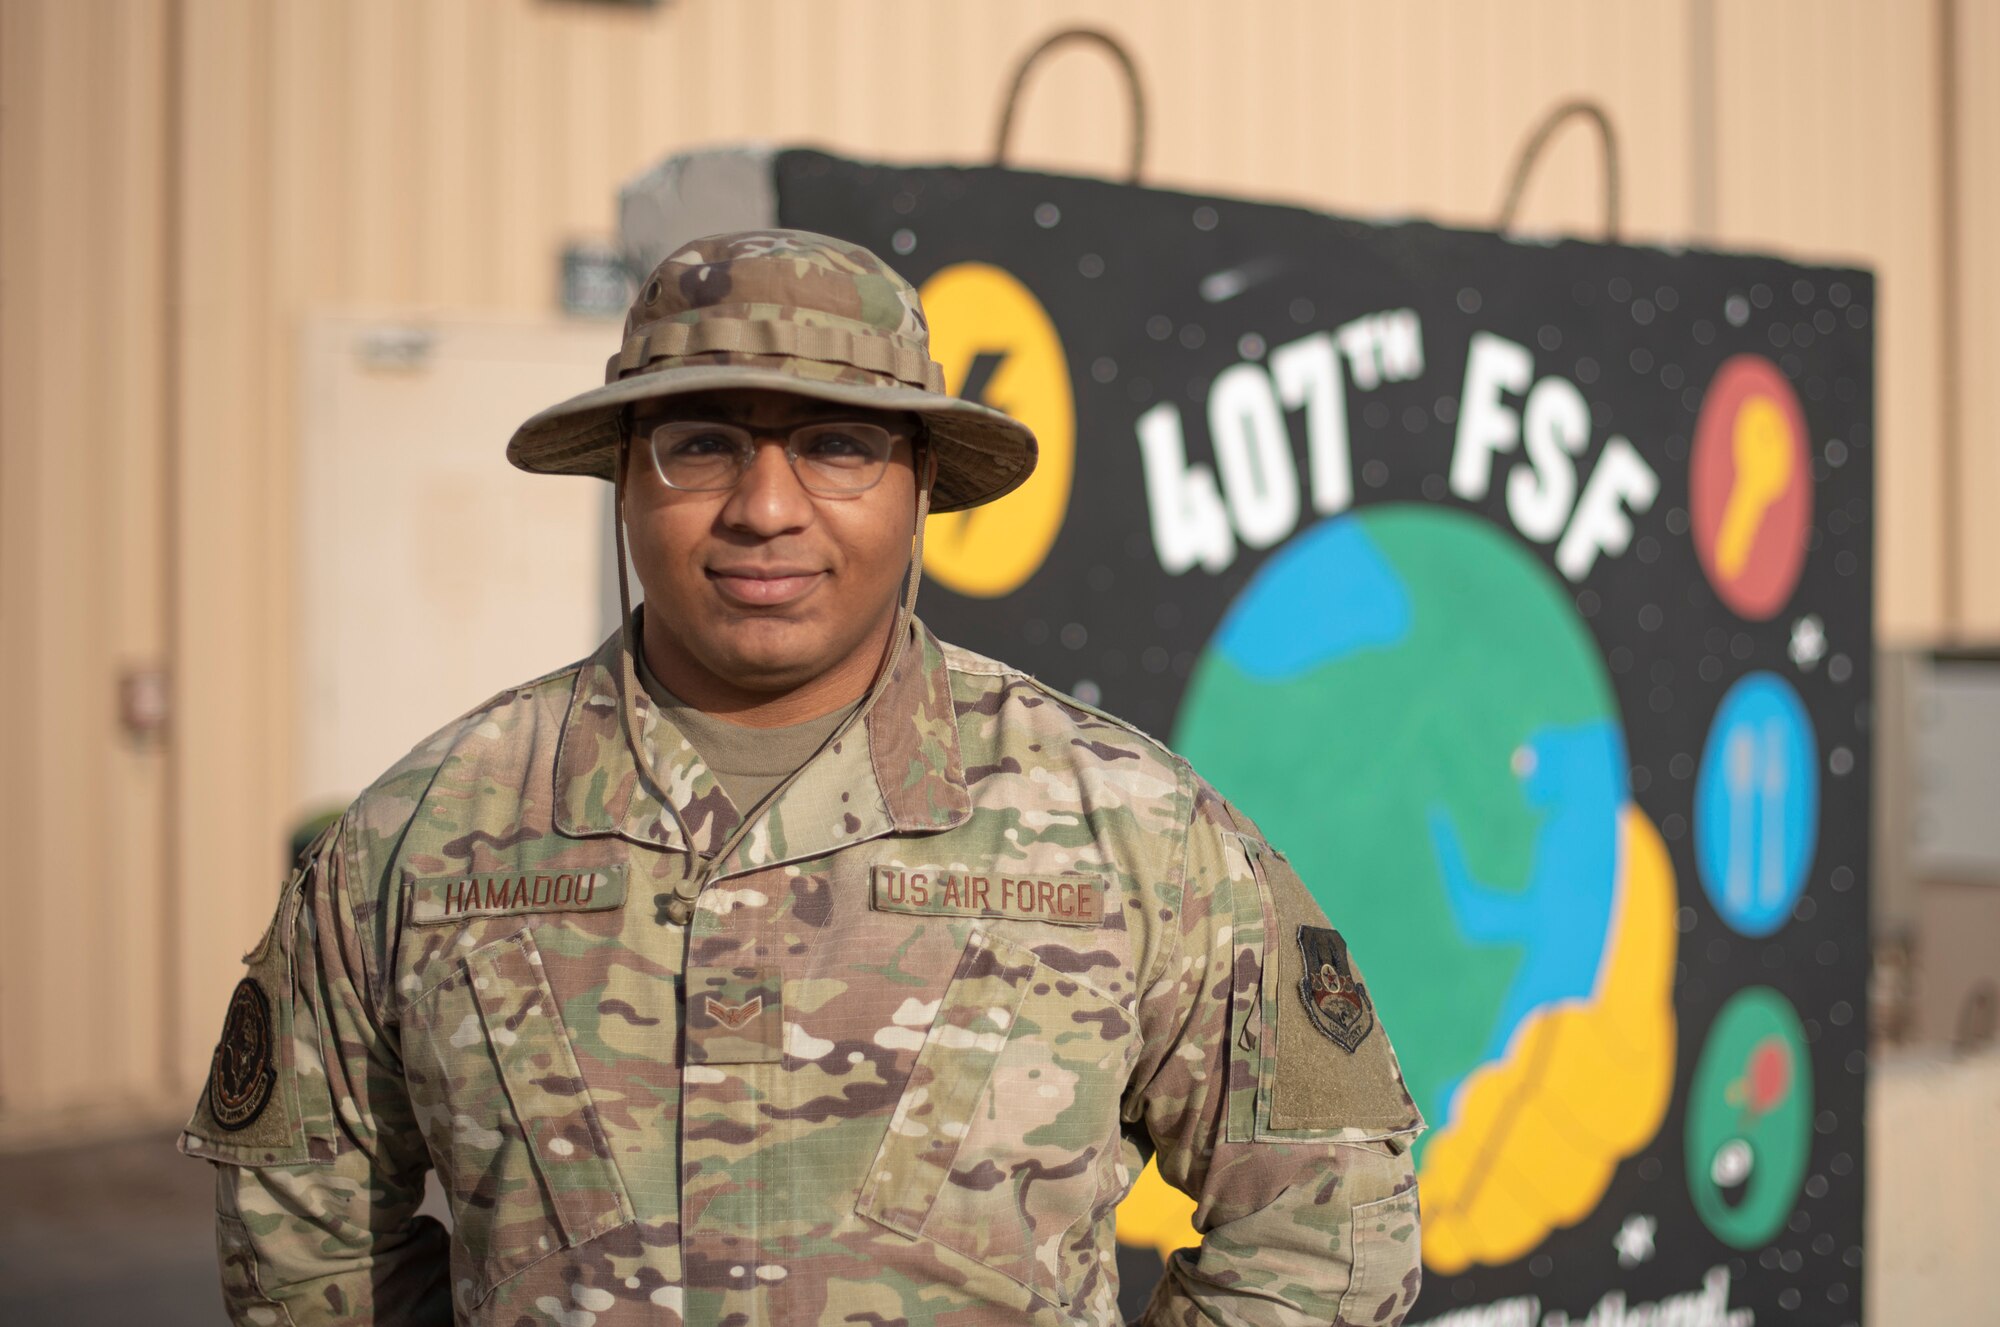 A1C Hamadou poses for a photo